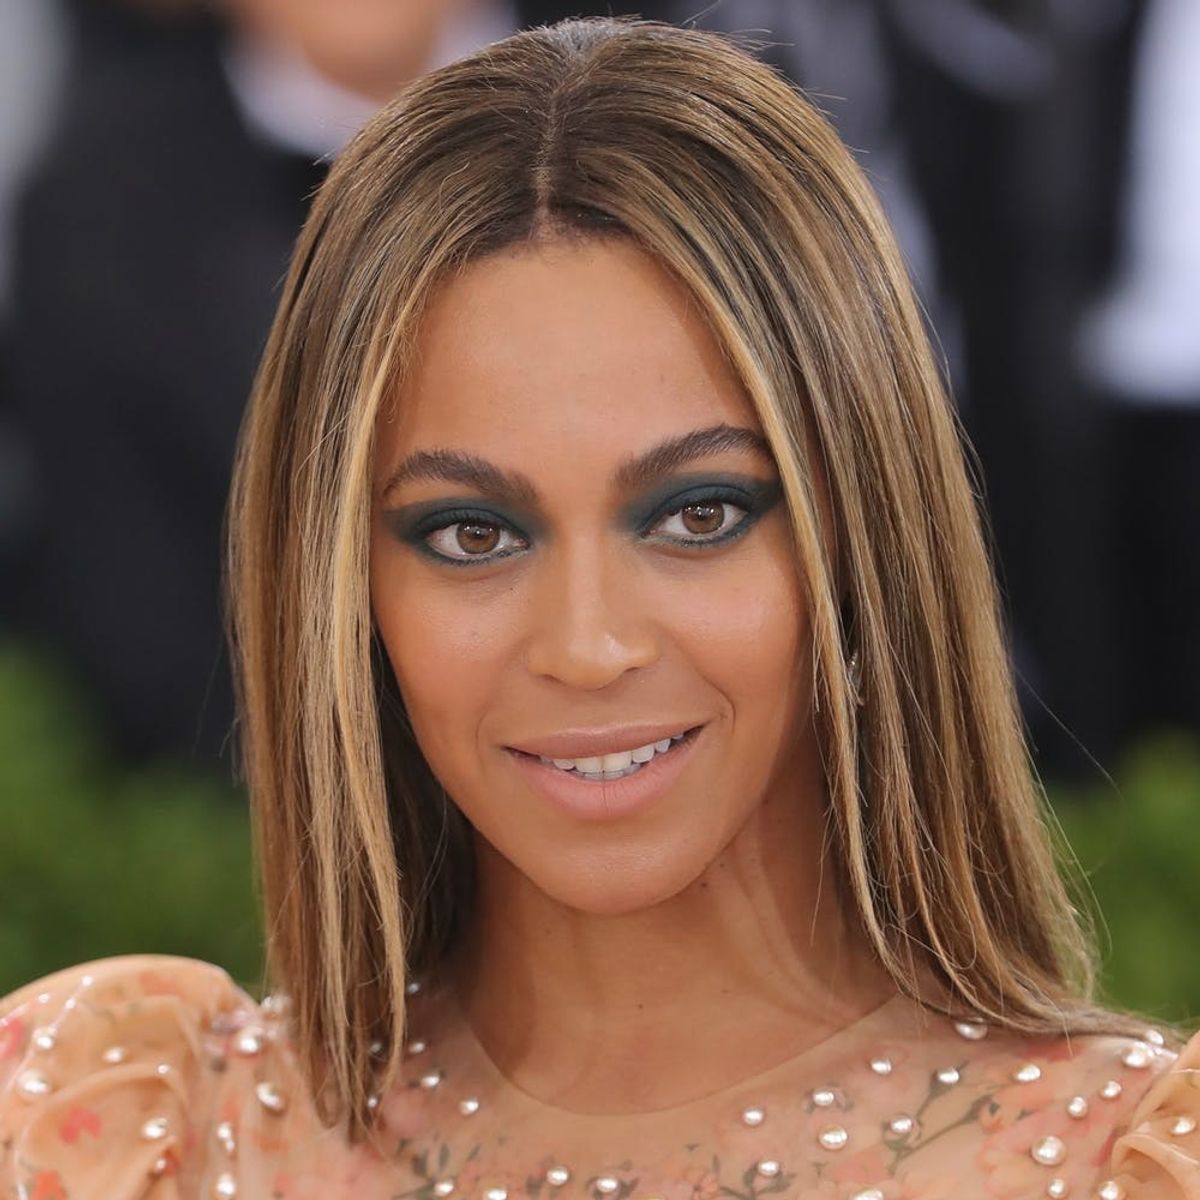 Beyonce Just Responded to the Dallas Shootings In the Absolute Best Way Possible